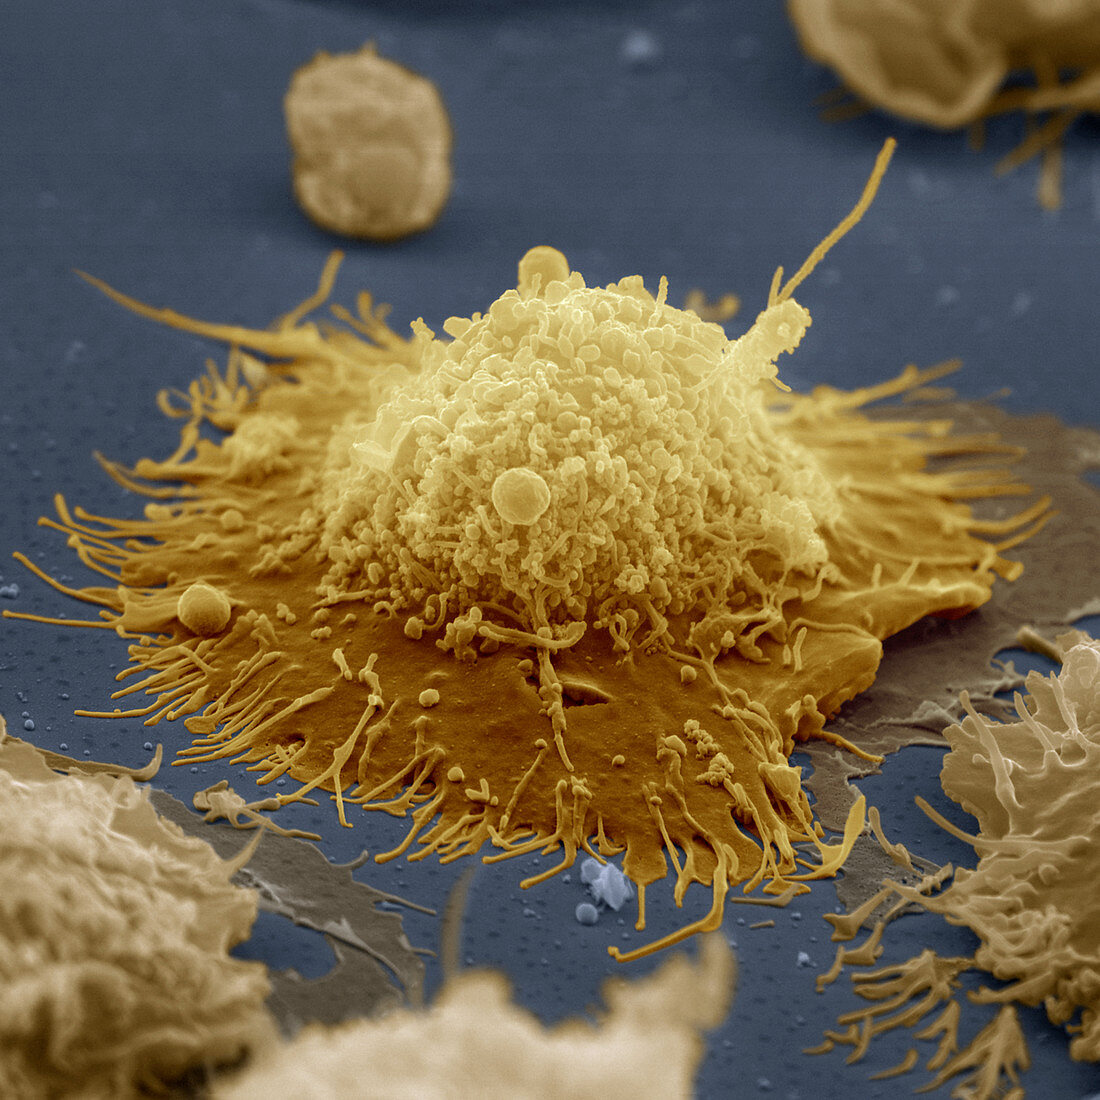 Coloured SEM of a B-lymphocyte white blood cell